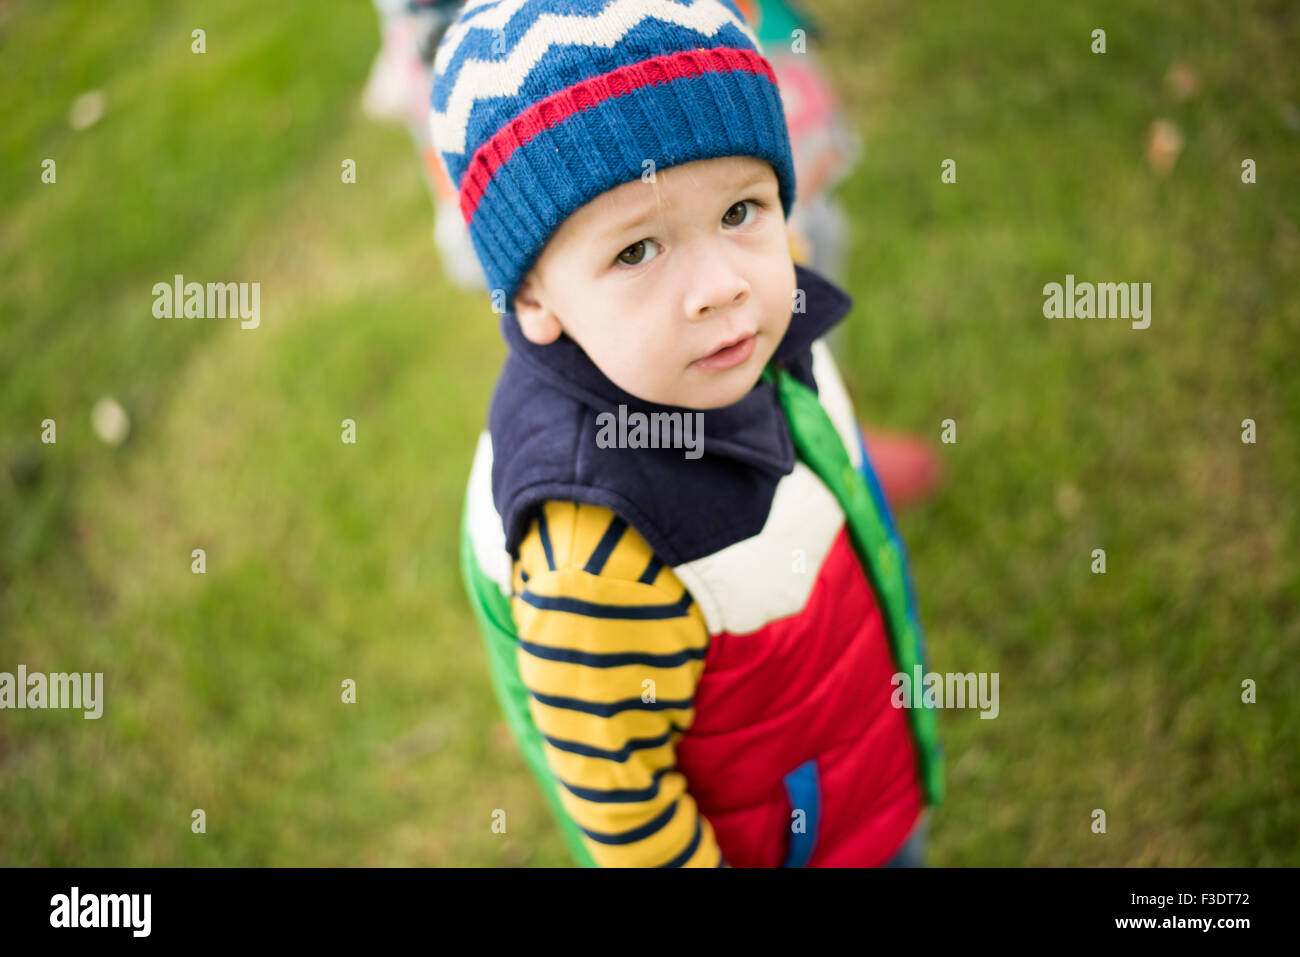 Boy looking at Camera in Park Stock Photo